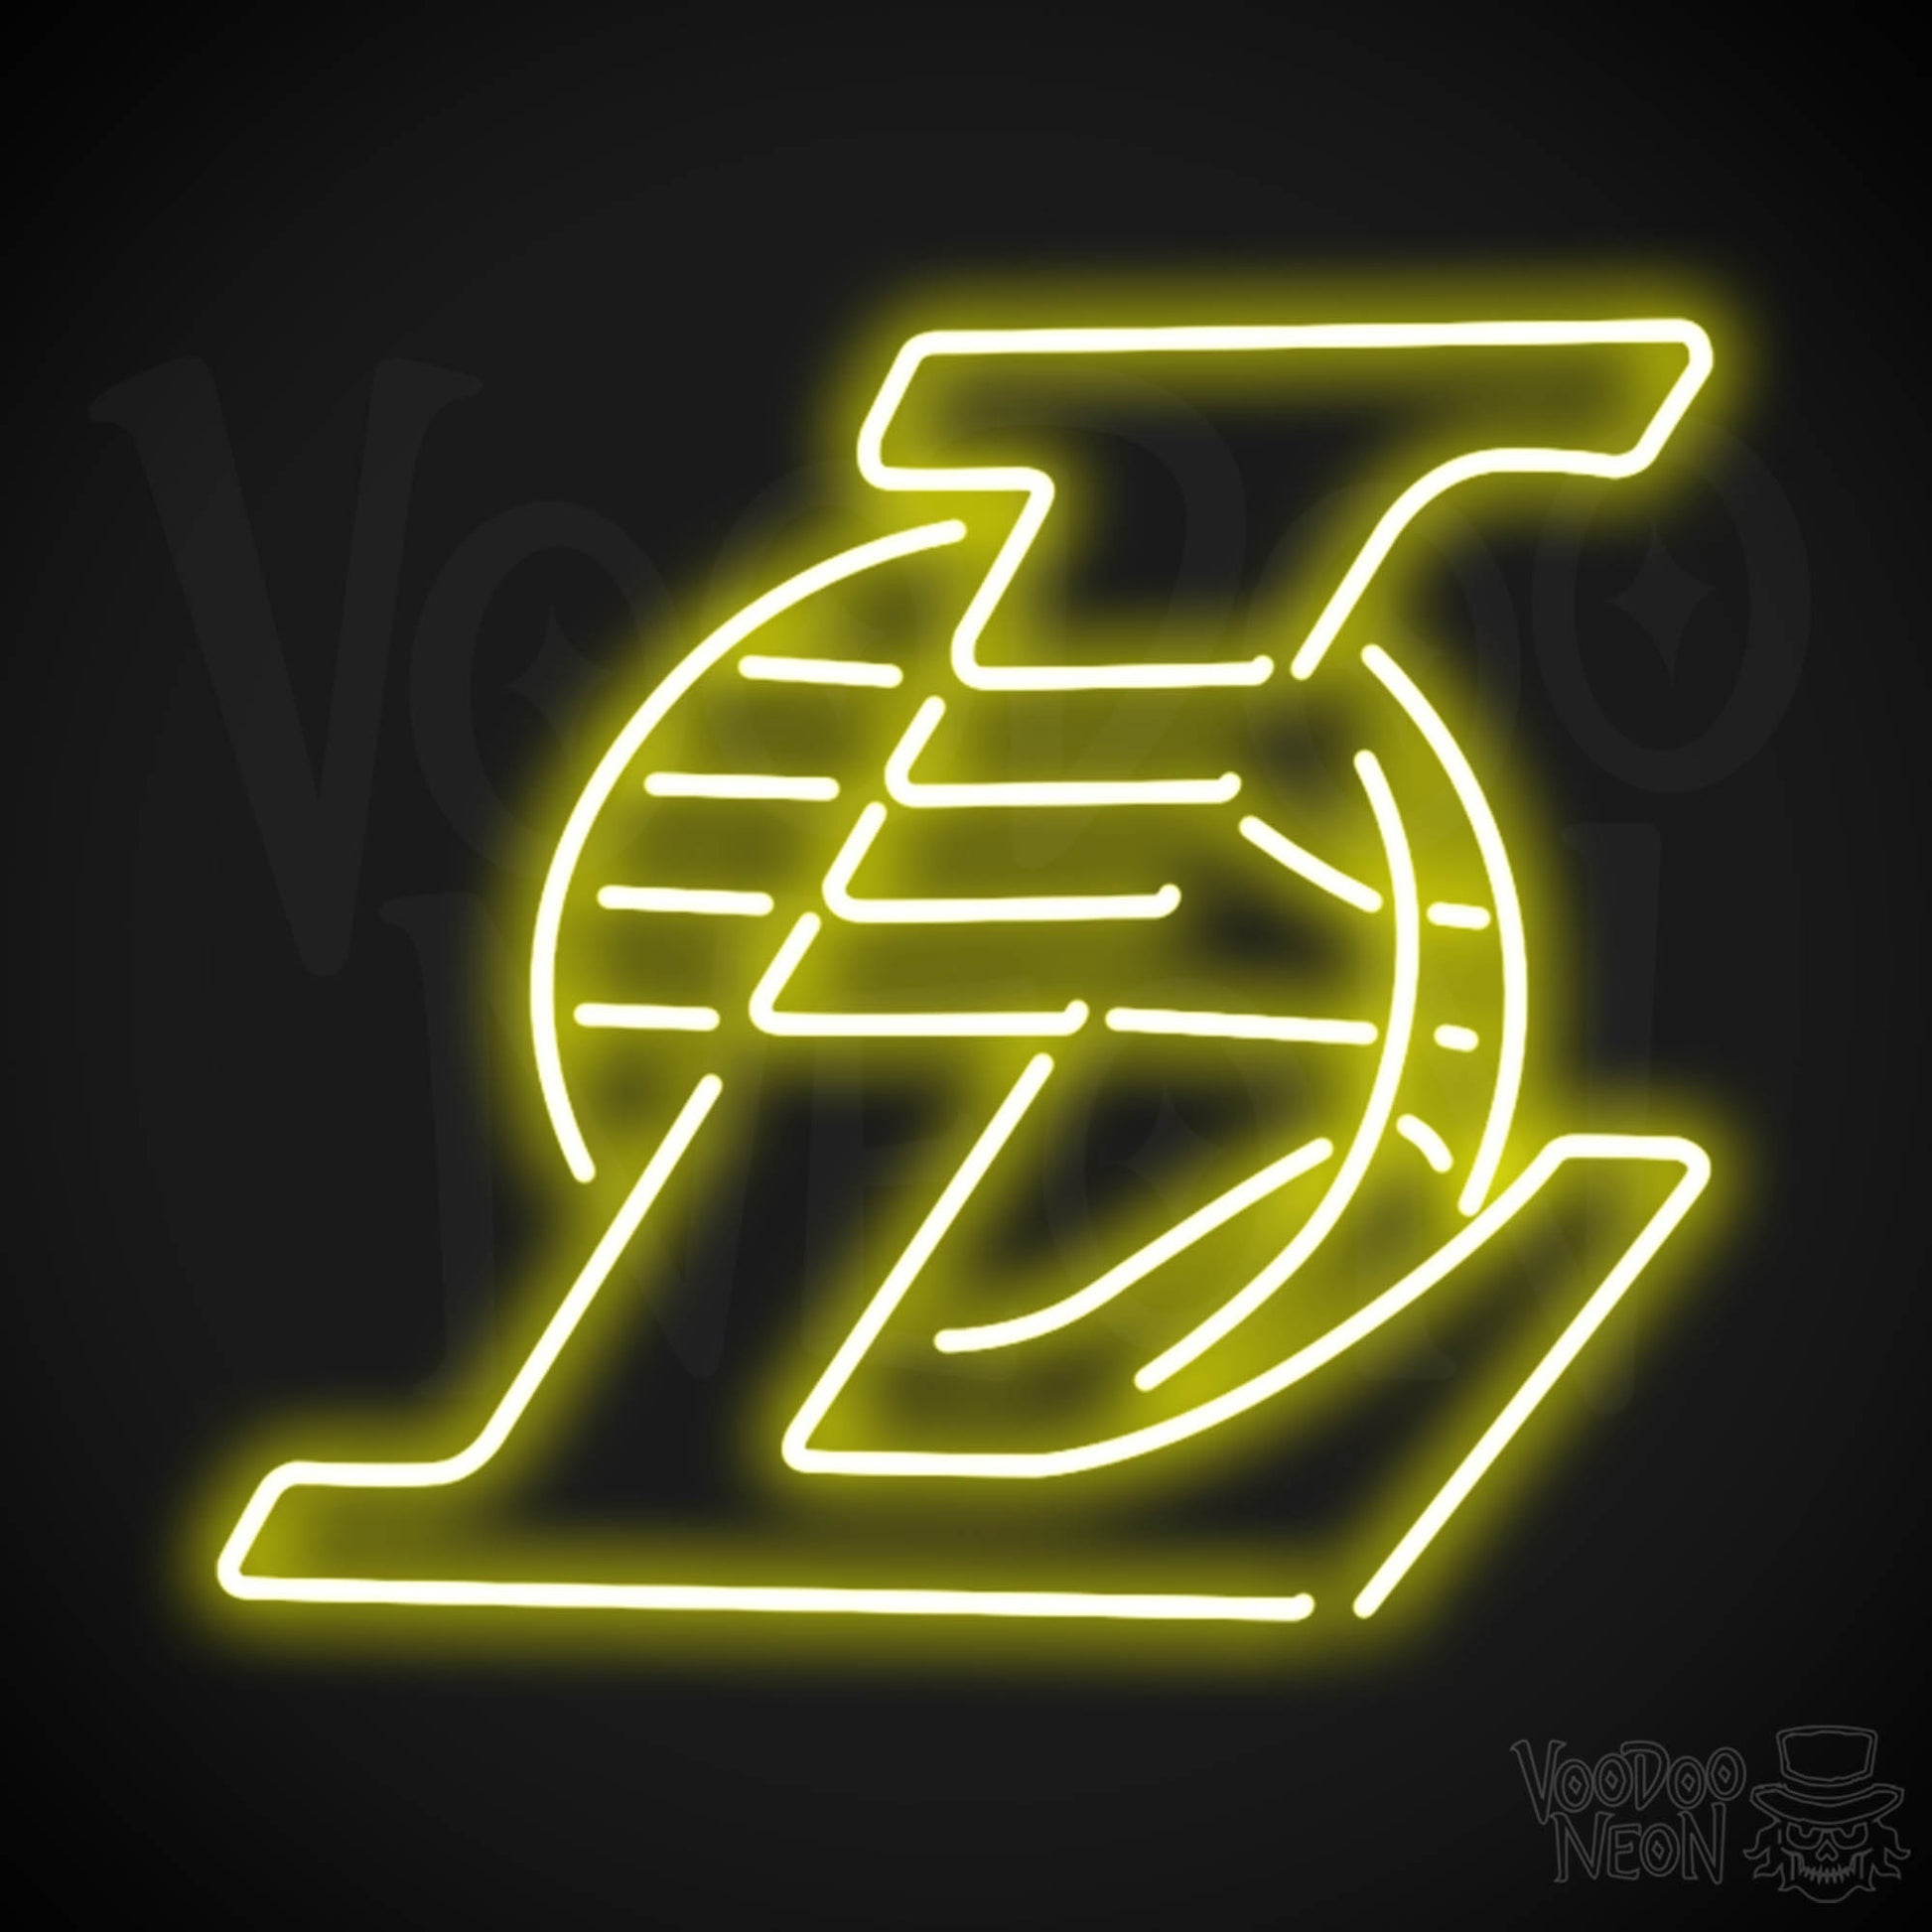 Los Angeles Lakers Neon Sign - Los Angeles Lakers Sign - Neon Lakers Logo Wall Art - Color Yellow